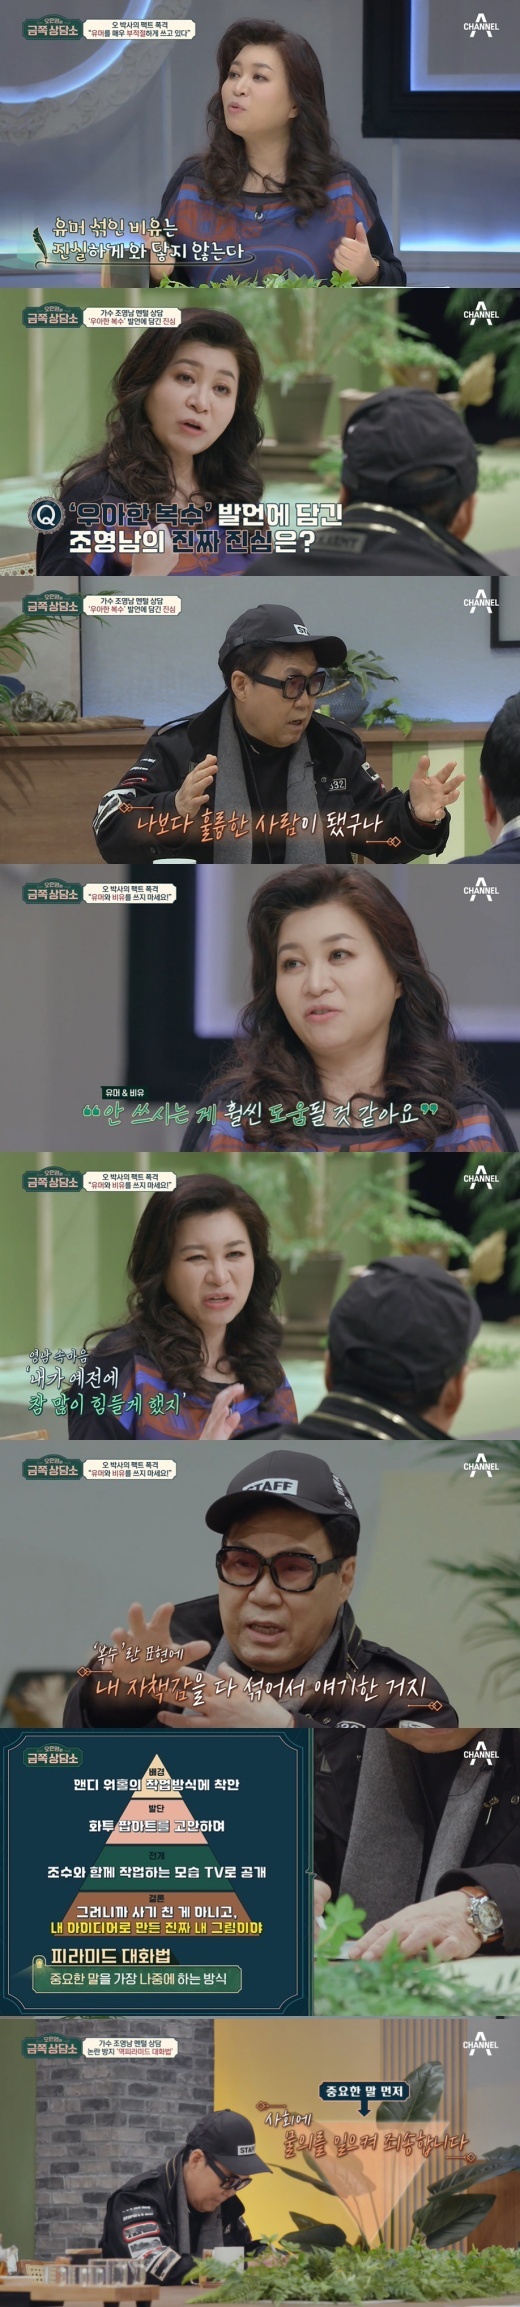 Singer Cho Yeong-nam reflected on the past days of various controversies.Cho Young-nam visited the counseling center as the oldest customer of 78 years old in the comprehensive channel channel A Oh Eun-youngs Gold Counseling Center broadcasted on the afternoon of the 4th.Chos troubles were Why do I have antis and people see me as a bad guy? Chos comments have been criticized by the public several times.In April last year, his ex-wife, Actor Youn Yuh-jung, won the Best Supporting Actress Award at the 93rd Academy Awards (Oscar Awards), saying, This news is the best shot at cheating men, elegant revenge.I am more careful in the future, the two of them marriage in 1974, but divorced in 1987 due to Cho Young-nams affair.But I almost died because of that, he said. I won the Academy Award in my other side, so I talked in the Western way, but what are you putting chopsticks on someone elses feast?It was once so huge that the exhibition was suspended, he recalled.Dr Oh Eun Young said, When you talk about a wave in an open place, you use your own humor and wit.But the humorous analogy to the angry public does not really touch it. He asked the truth in graceful revenge .Cho Young-nam said, I wanted to express You have become a better person than me and that was true.Dr. Oh shook his head and advised, It would be much better if you do not use your own wit and your own rejuvenating term. Jung Hyung-don also said, You have a great wit, but you do not have any consideration for your opponent in Wit.Oh Eun Young said, The word revenge will mean I have made it difficult before in my mind.However, there are many people who do not talk to Cho Young-nam in 1:1 and do not get so much. When you talk in the future, you should write Reverse pyramid dialogue.Cho Young-nam was shocked and impressed by Dr. Ohs diagnosis. He reenacted the time of Youn Yuh-jungs award as a situation drama. It is an honor and historical event of Korea as well as me.I have been living with such a person for 13 years, he said, but again he took the line of close. I should have known (things like this) early, but Im sorry I have a few days left, said Cho Young-nam at the end of the broadcast.But there was no apology for Youn Yuh-jung, who would have been uncomfortable with his rash comments.It is a reason for public criticism to mention lightly the separation of my affair, which was one person.Can he reduce his speech mistakes now that he has the advice of Dr. Oh Eun Young?